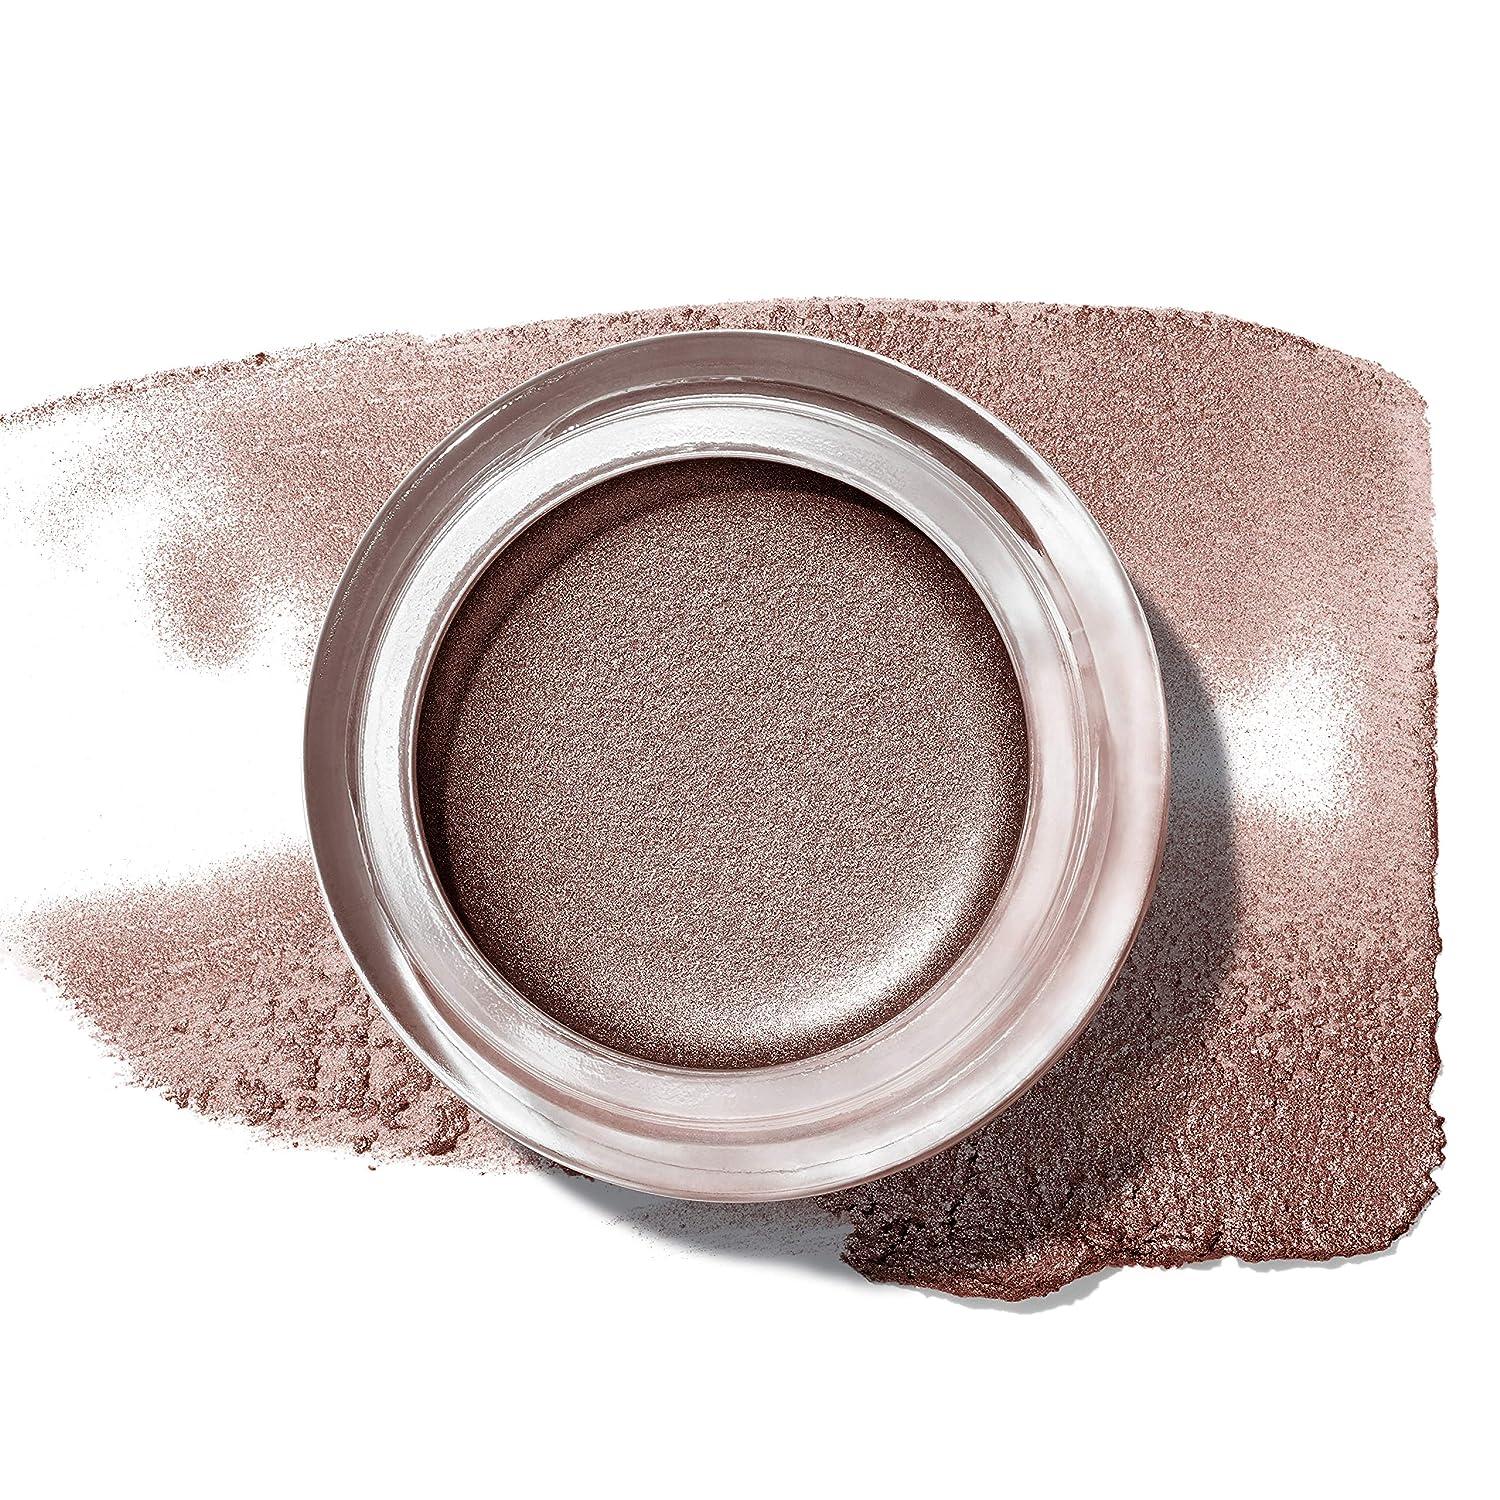 Cr me Eyeshadow by Revlon ColorStay 24 Hour Eye Makeup Highly Pigmented  Cream Formula in Blendable Matte & Shimmer Finishes 720 Chocolate 0.18 Oz  Chocolate 0.18 Ounce (Pack of 1)